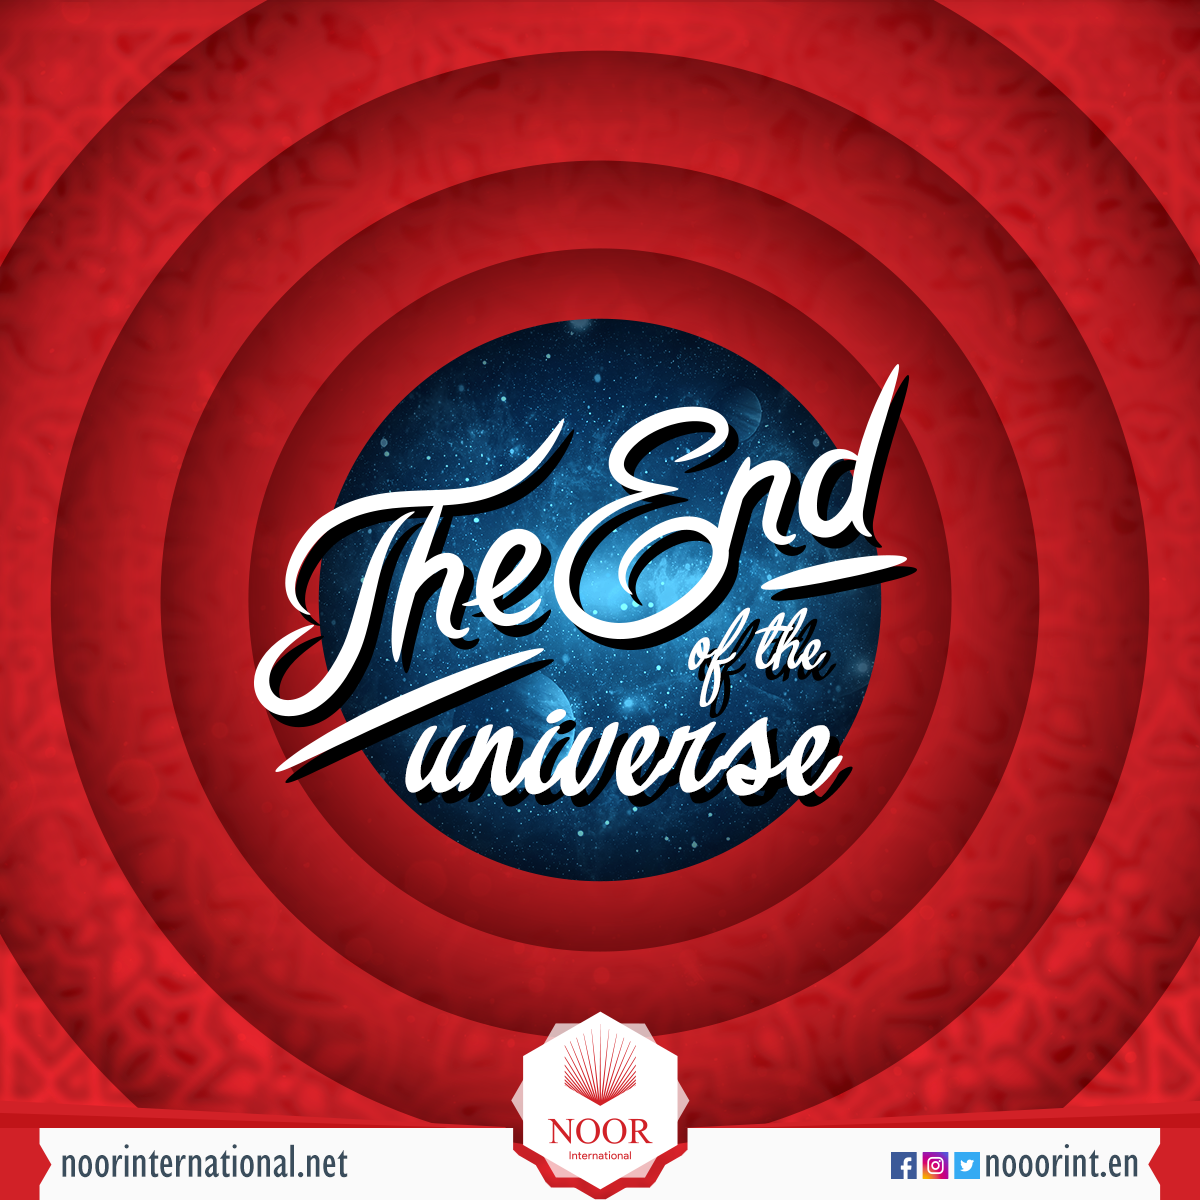 The End of the Universe